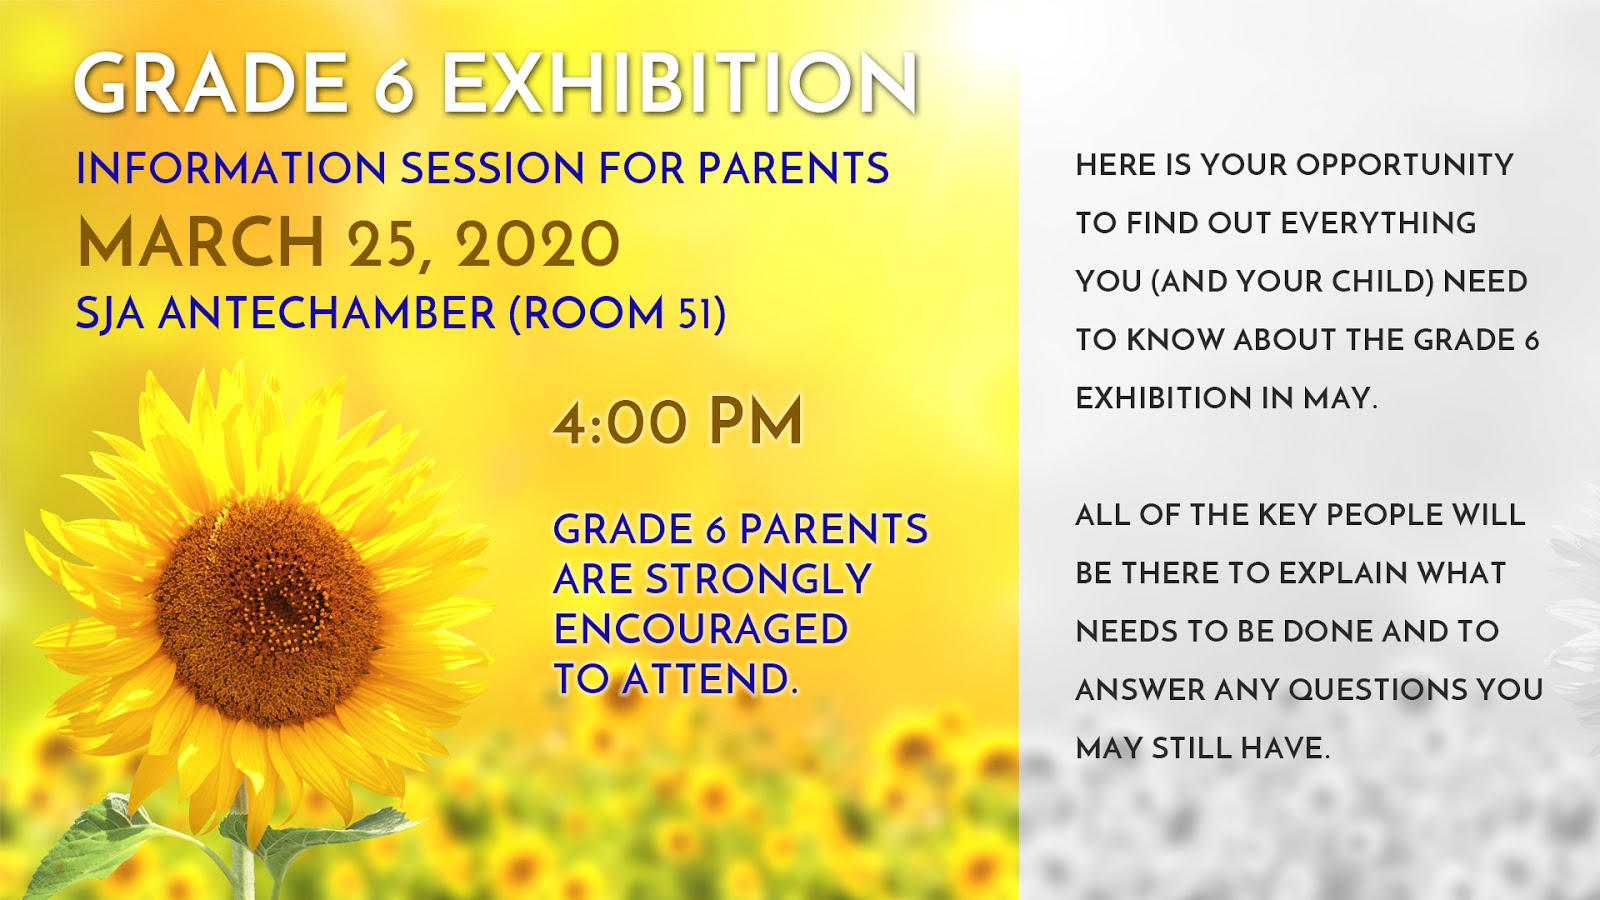 Exhibition Information Session